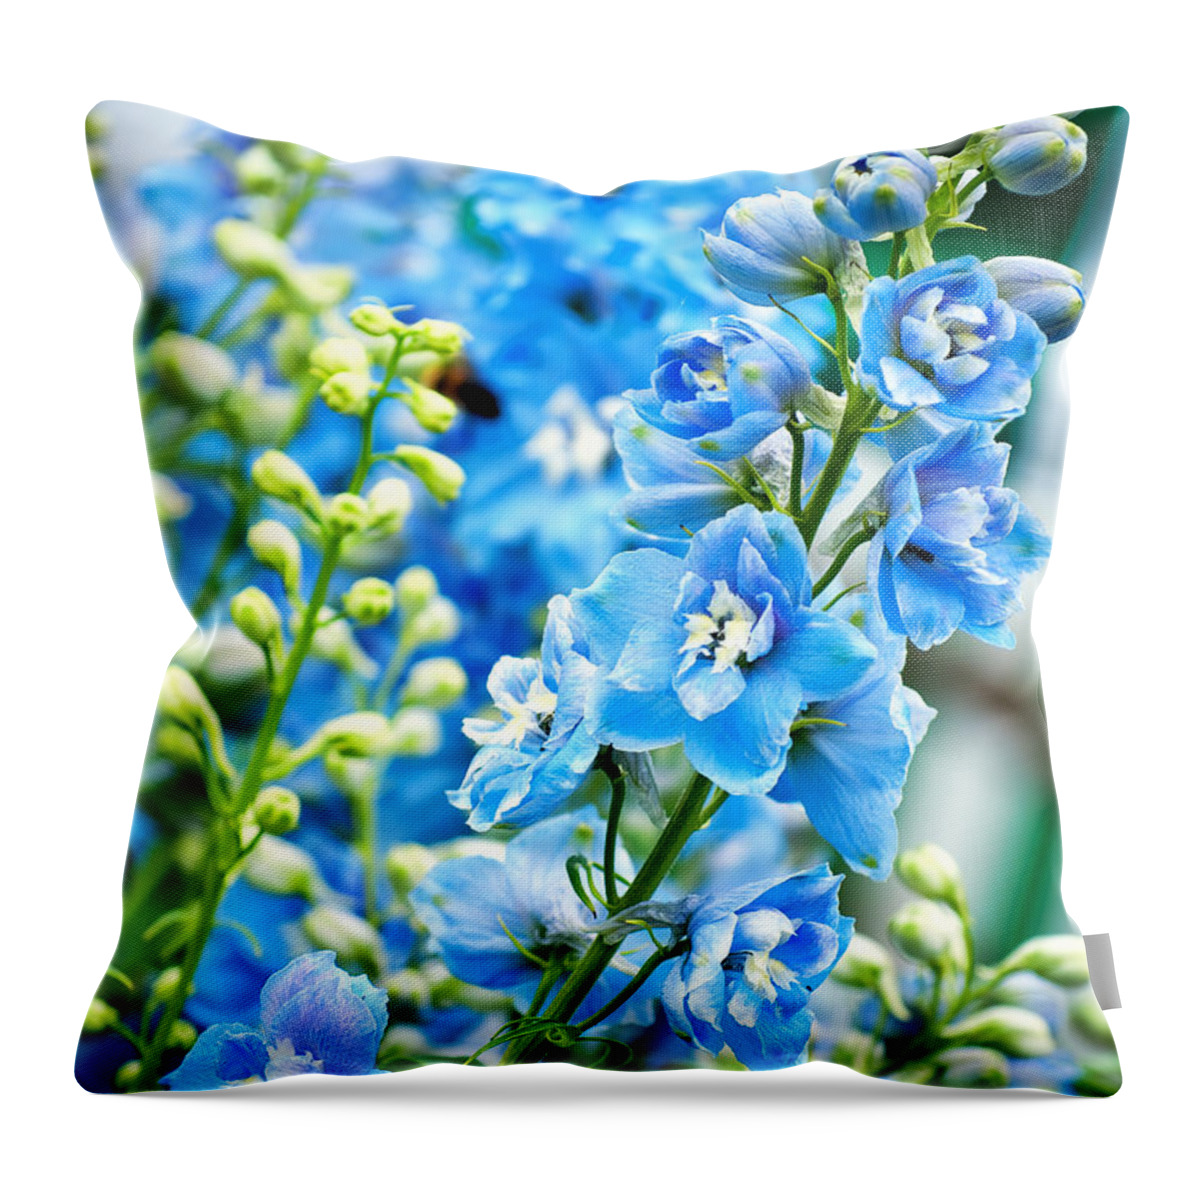 Natural Throw Pillow featuring the photograph Blue Flowers by Antony McAulay